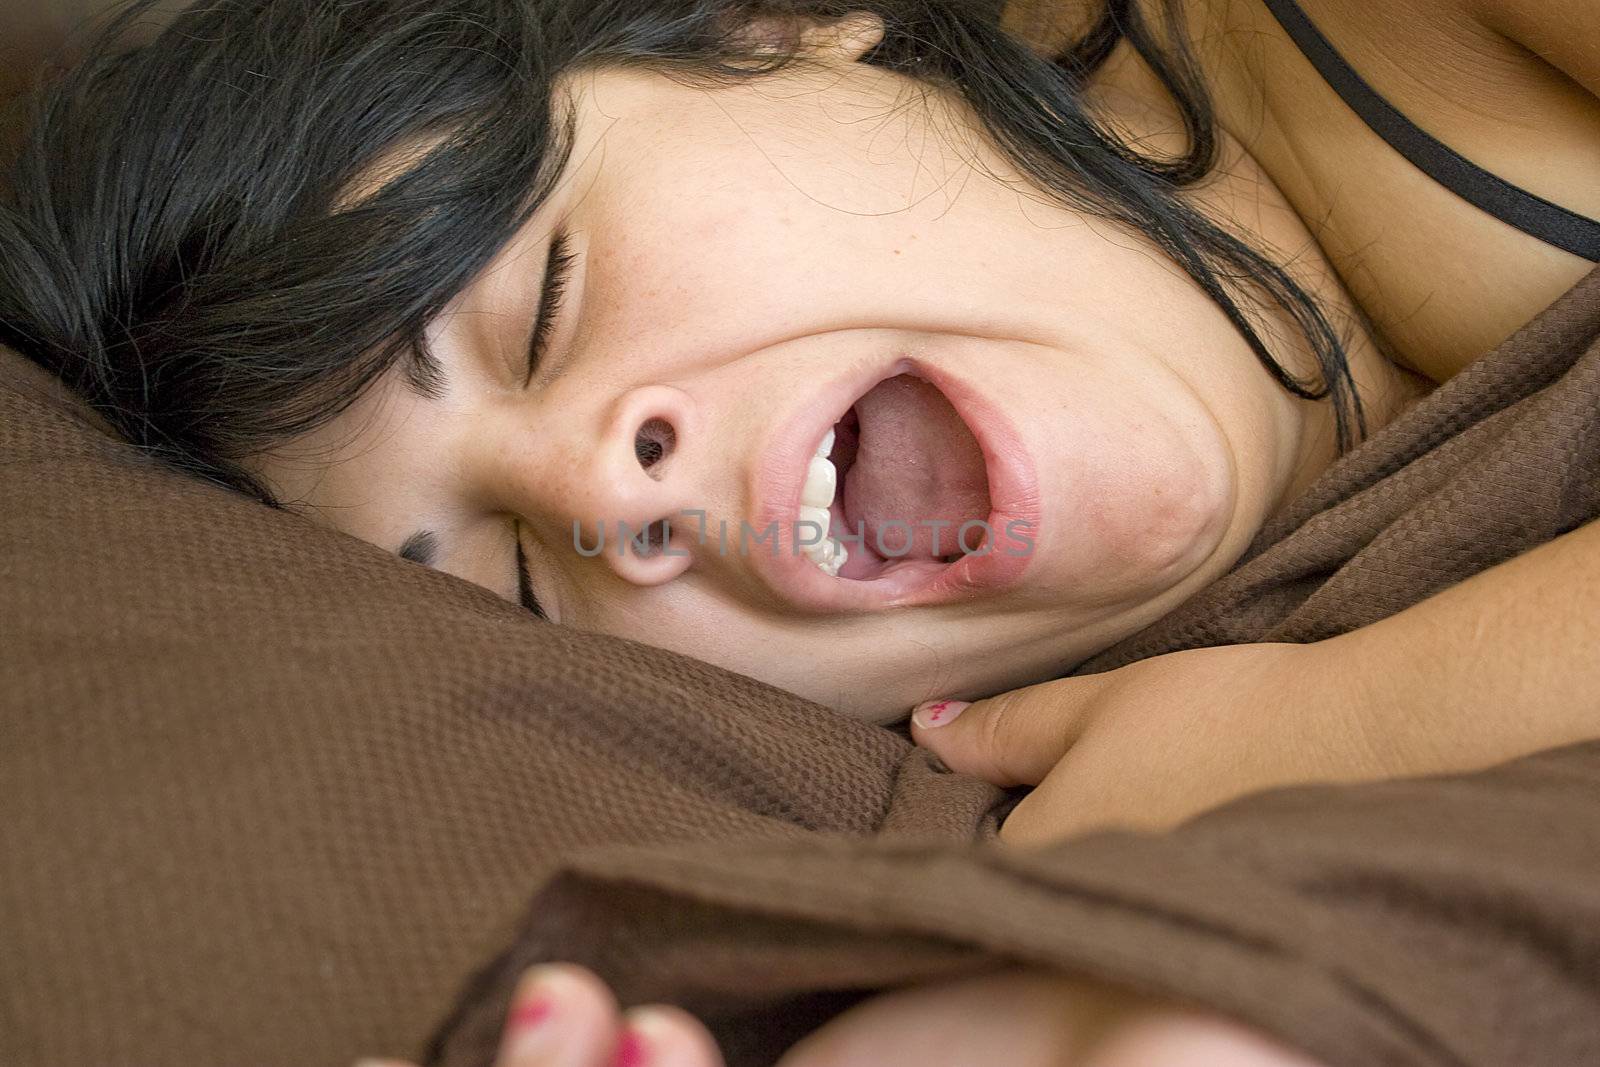 A young brunette woman is yawning as she lays in her bed.